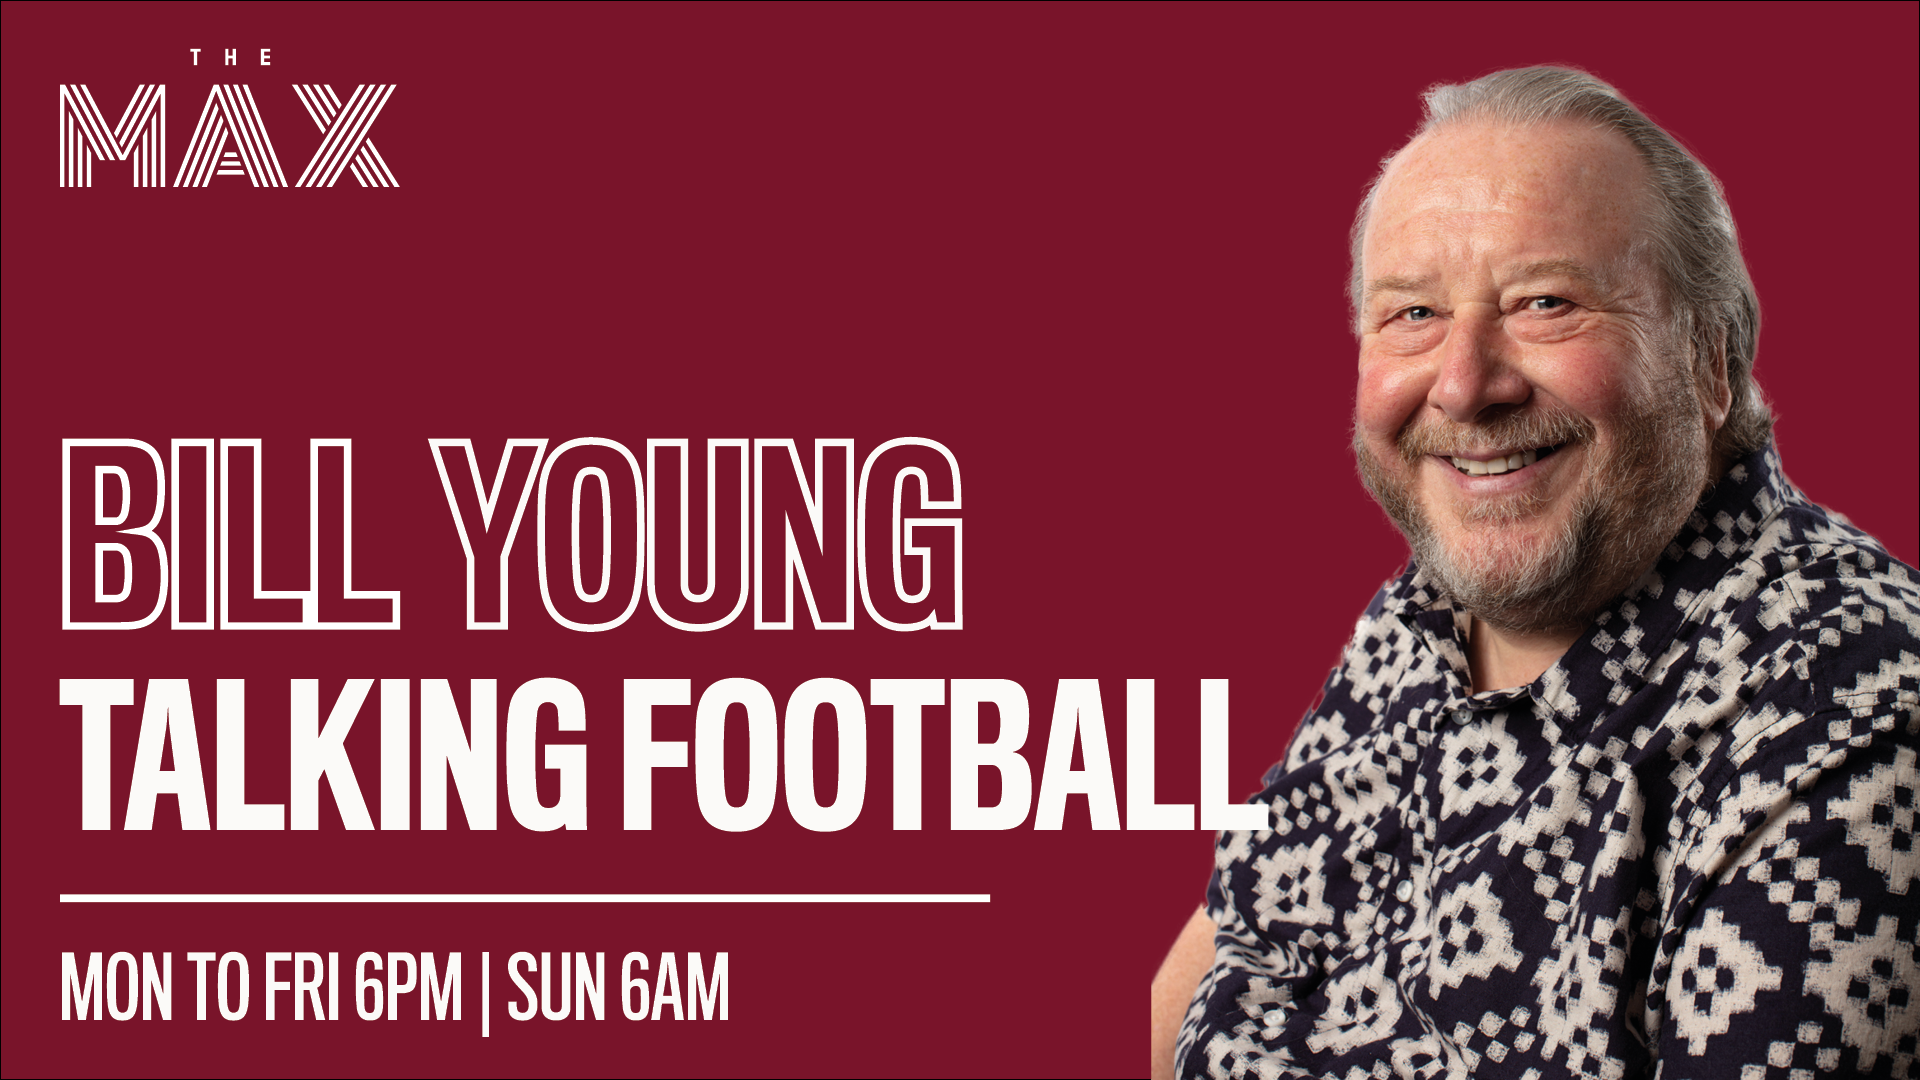 Talking Football with Bill Young - Thursday 6th May